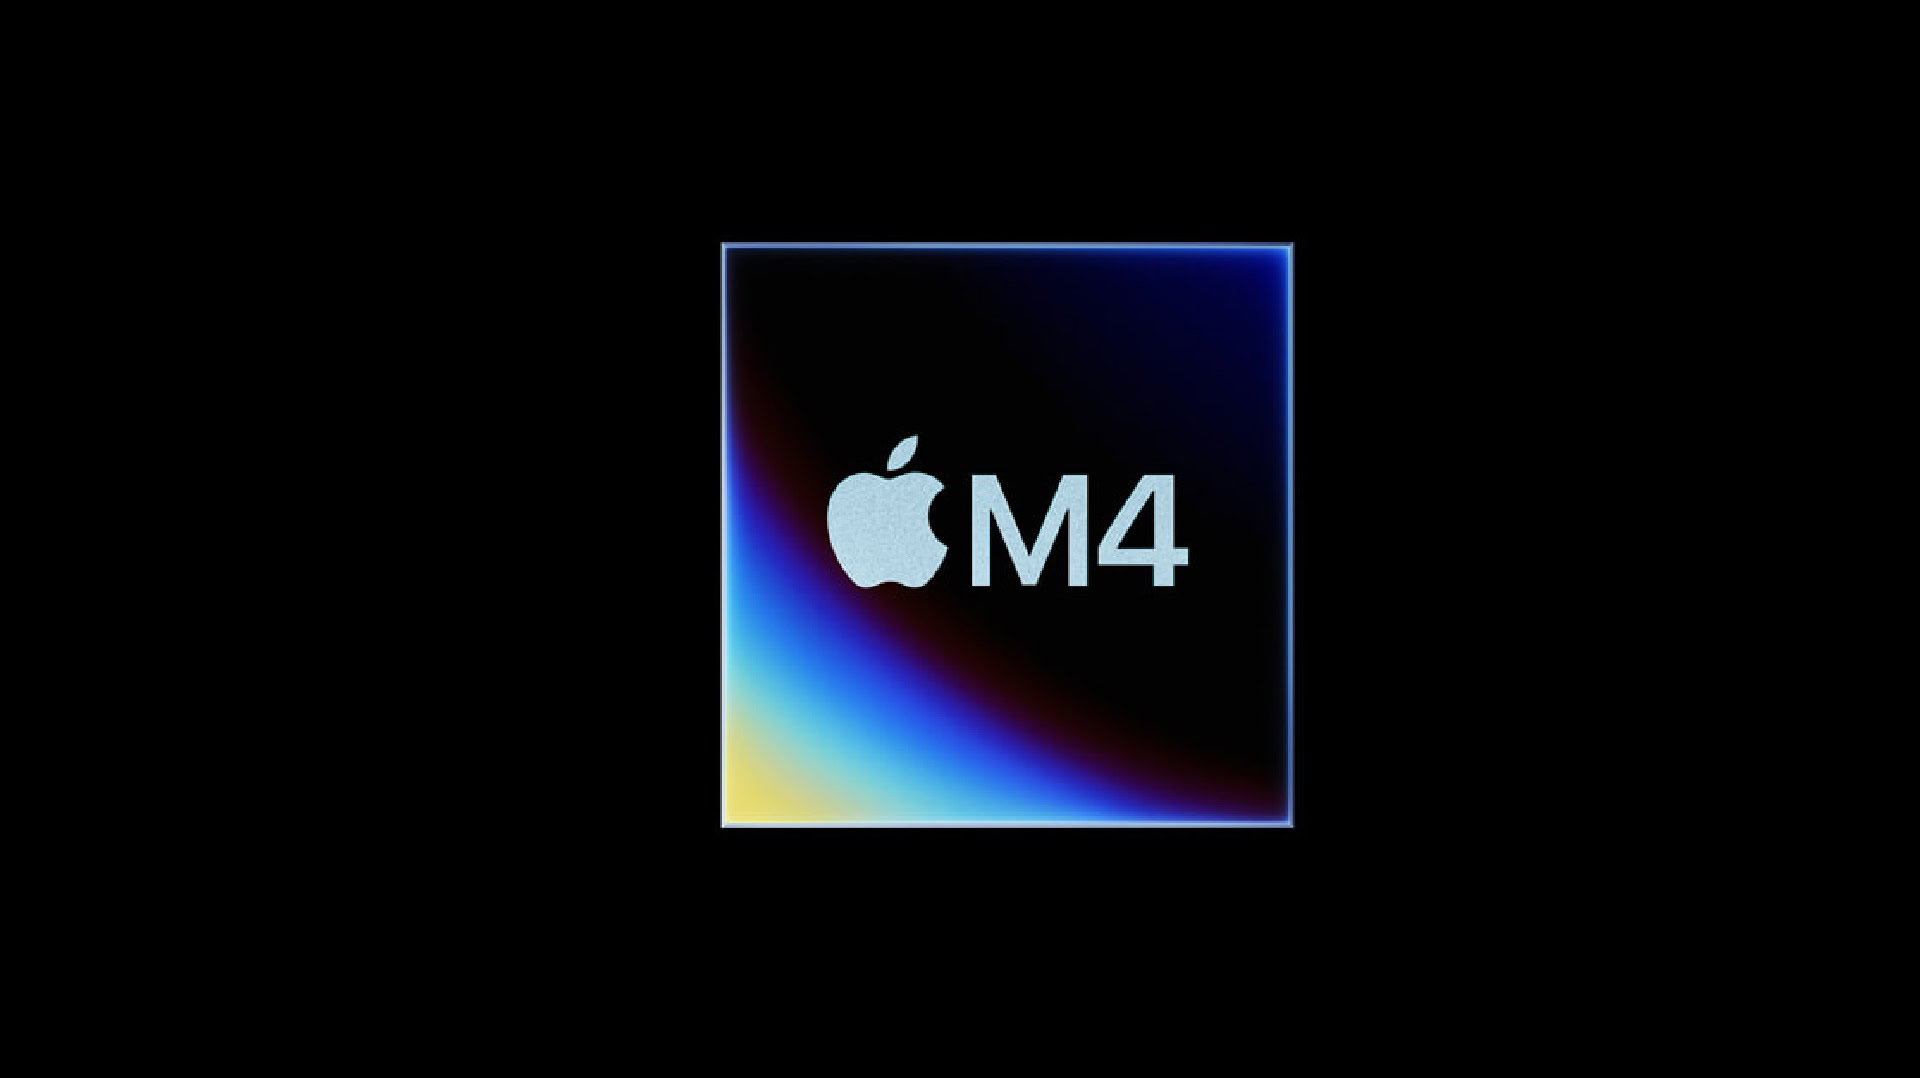 Apple M4 processor: A deep dive into features and performance